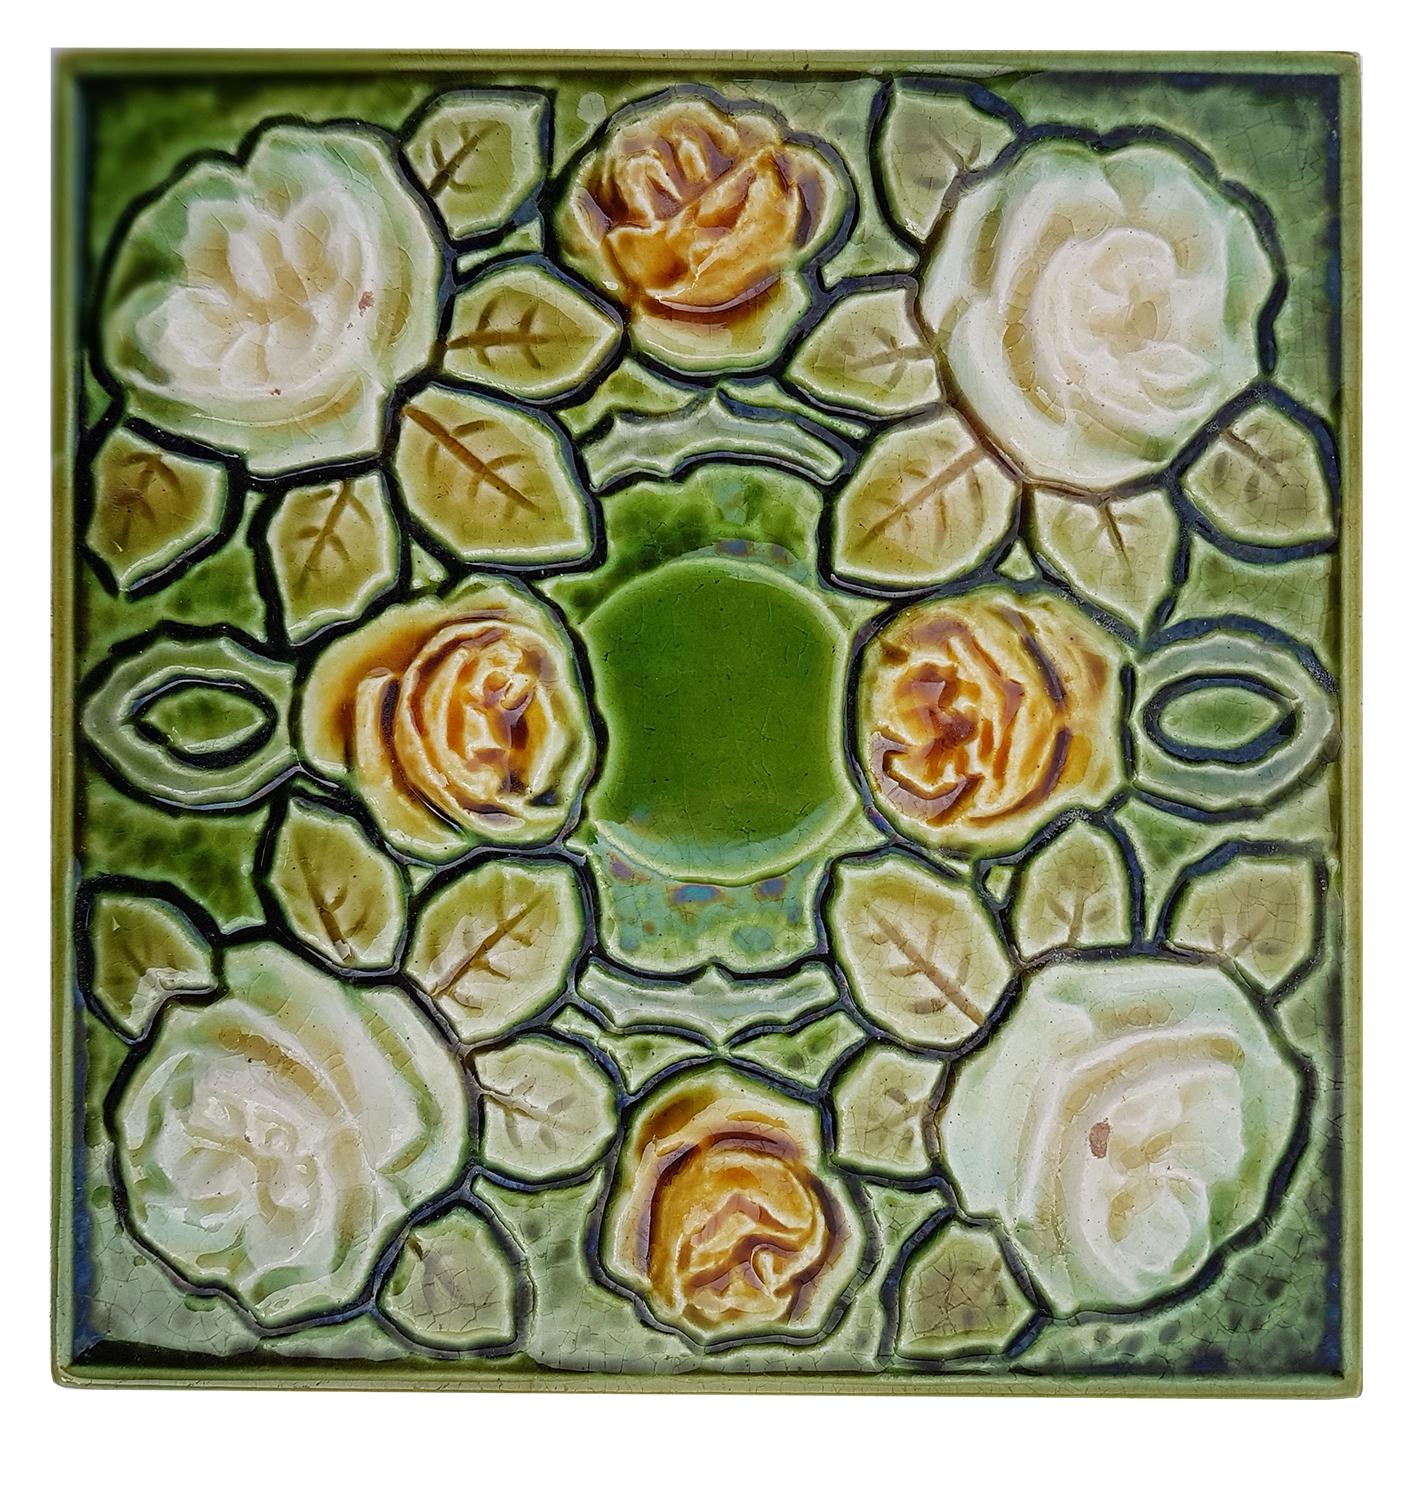 This is an amazing set of original Art Nouveau handmade tiles. A beautiful relief and color. With a stylish flower design. These tiles would be charming displayed on easels, framed or incorporated into a custom tile design. 

Please notice that